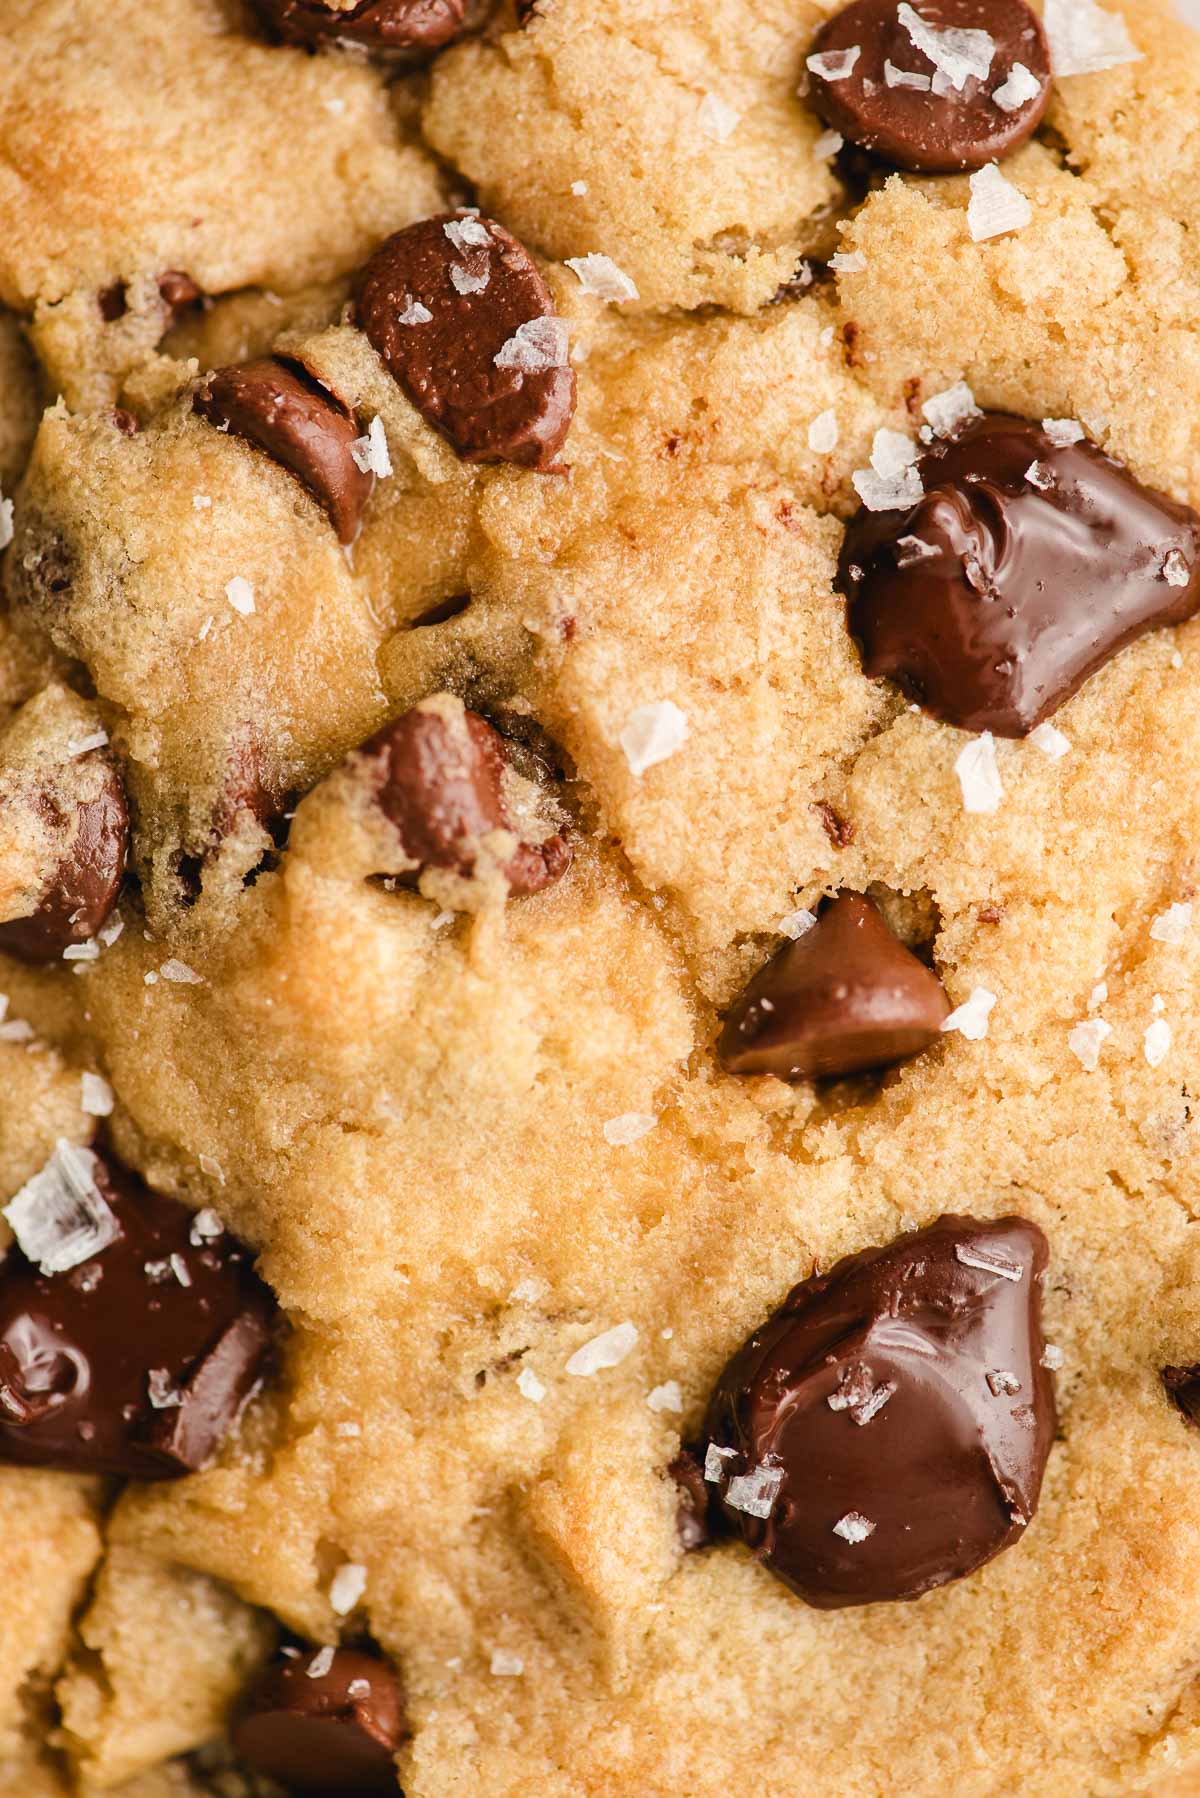 Very up close picture of a chocolate chip and chocolate chunk cookie.